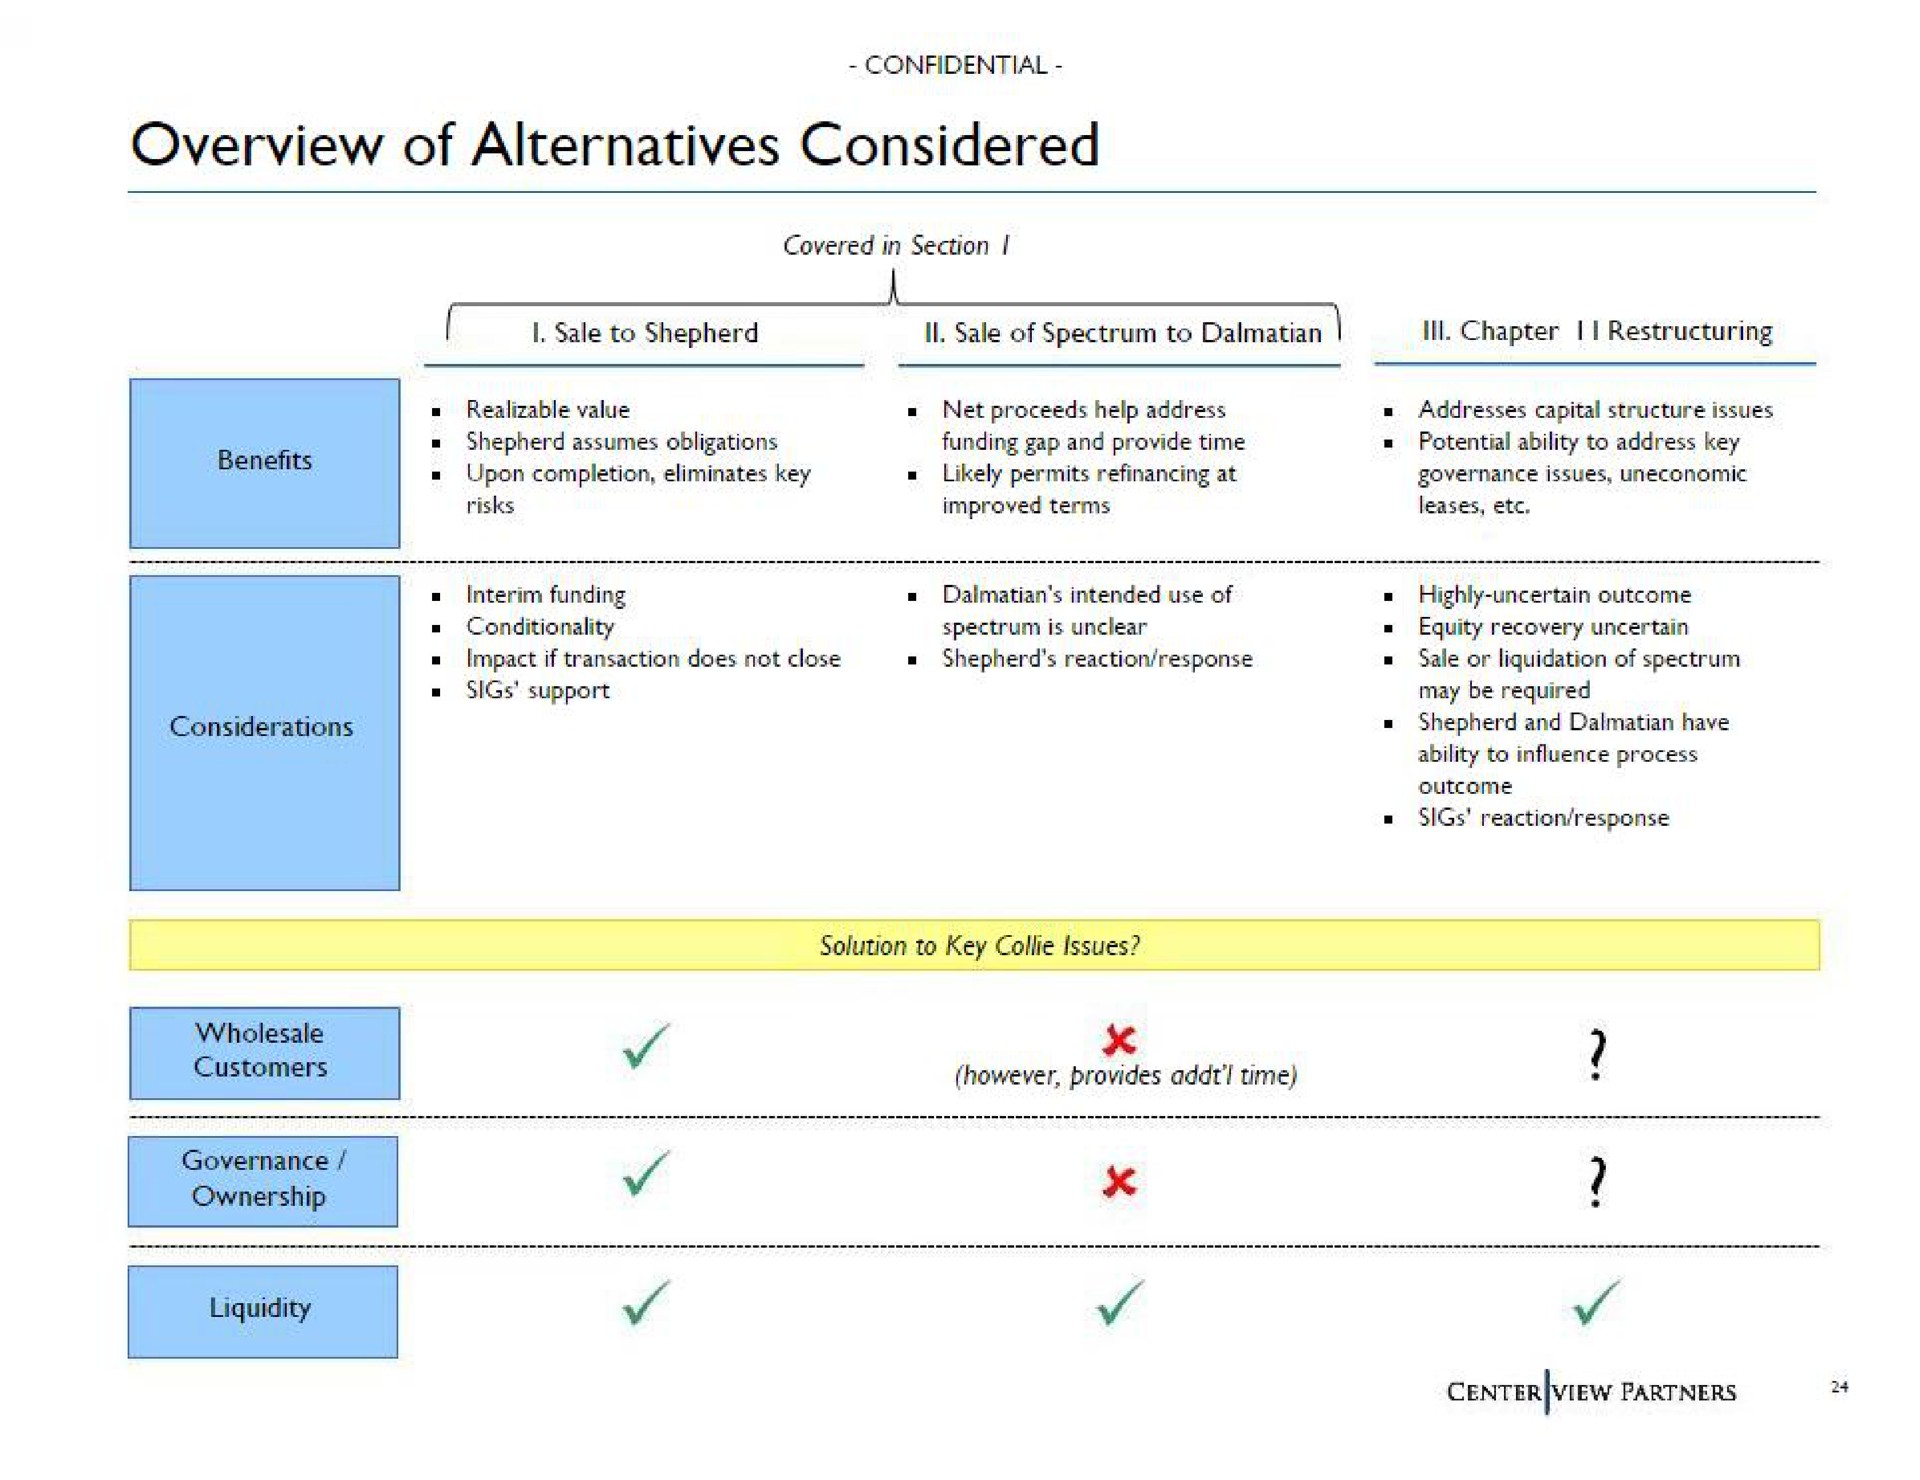 overview of alternatives considered a | Centerview Partners